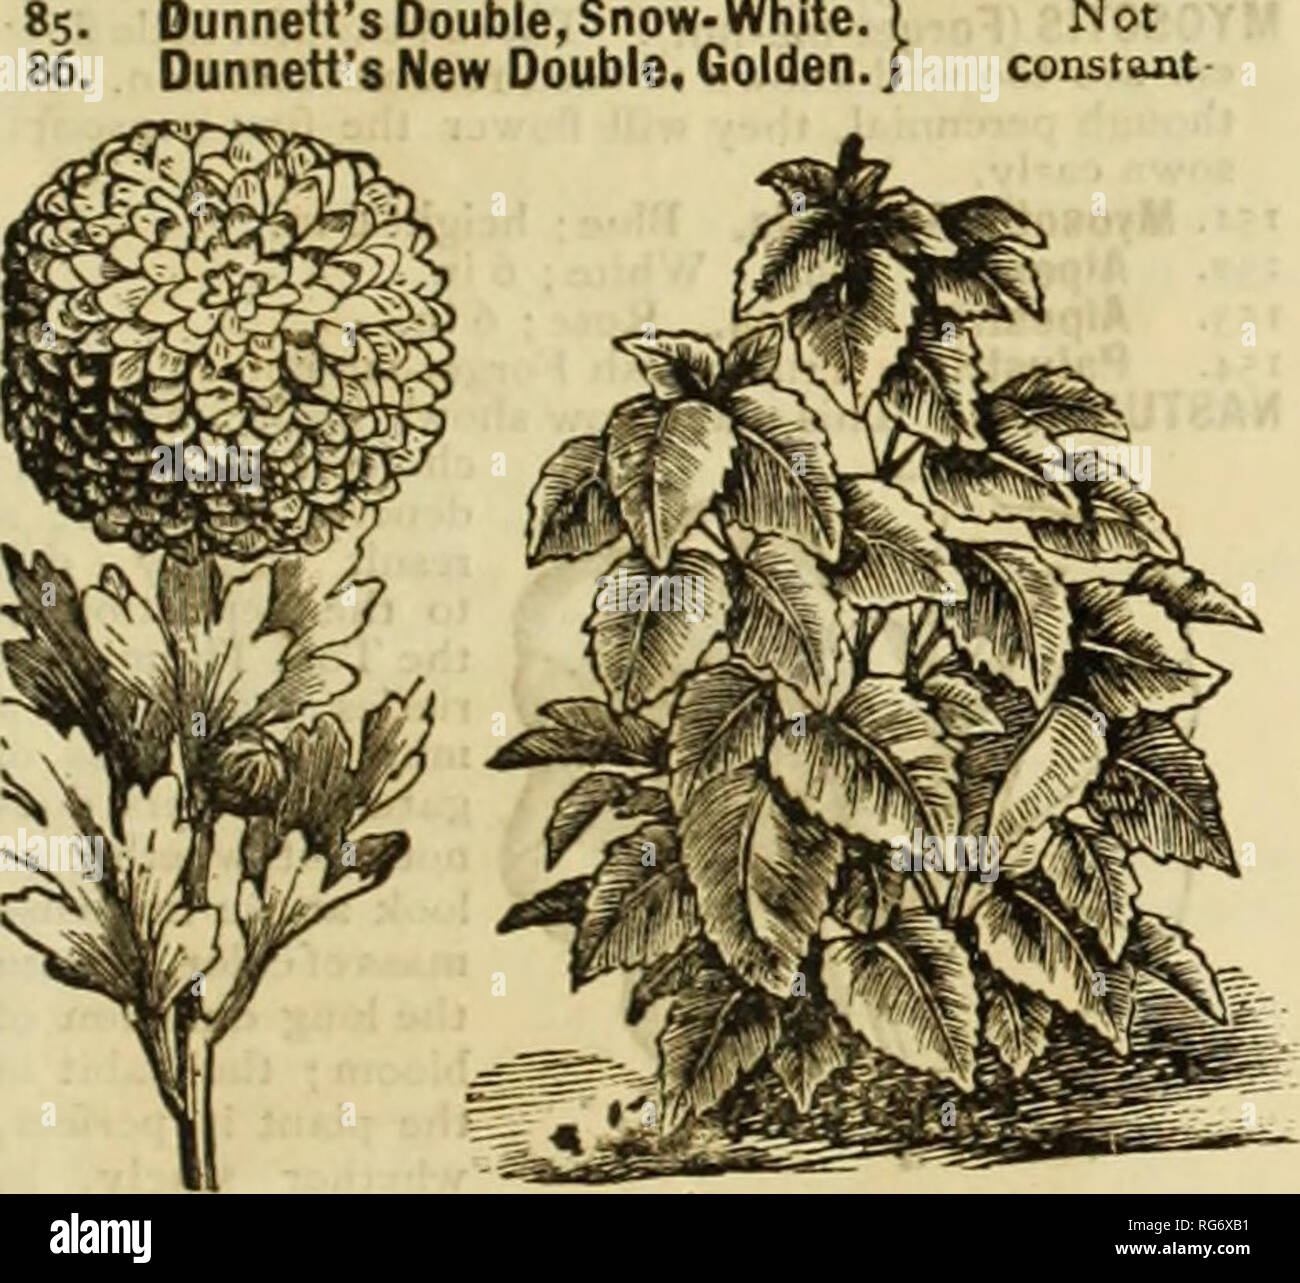 . [Burpee's farm annual]. Nursery stock Pennsylvania Philadelphia Catalogs; Flowers Catalogs; Vegetables Catalogs; Seeds Catalogs; Livestock Catalogs. 50.—Browallia Cerviakowski. No. 63.—Candytuft—New Hybrid Dwarf. 83. Clementei. New and improved Dusty Miller, pro- ducing crowns of silvery leaves, deeply fringed. CHRYSANTHEMUM. The following annual varieties are exceedingly pretty. Of easy and rapid growth, they are bright, cheerful, and free bloomers. 83. Cornnarium. Double, mixed ; x&quot;% feet. 84. Tricolor, Burridge's Improved. Flowers crimson, with white center; positively beautiful; j f Stock Photo